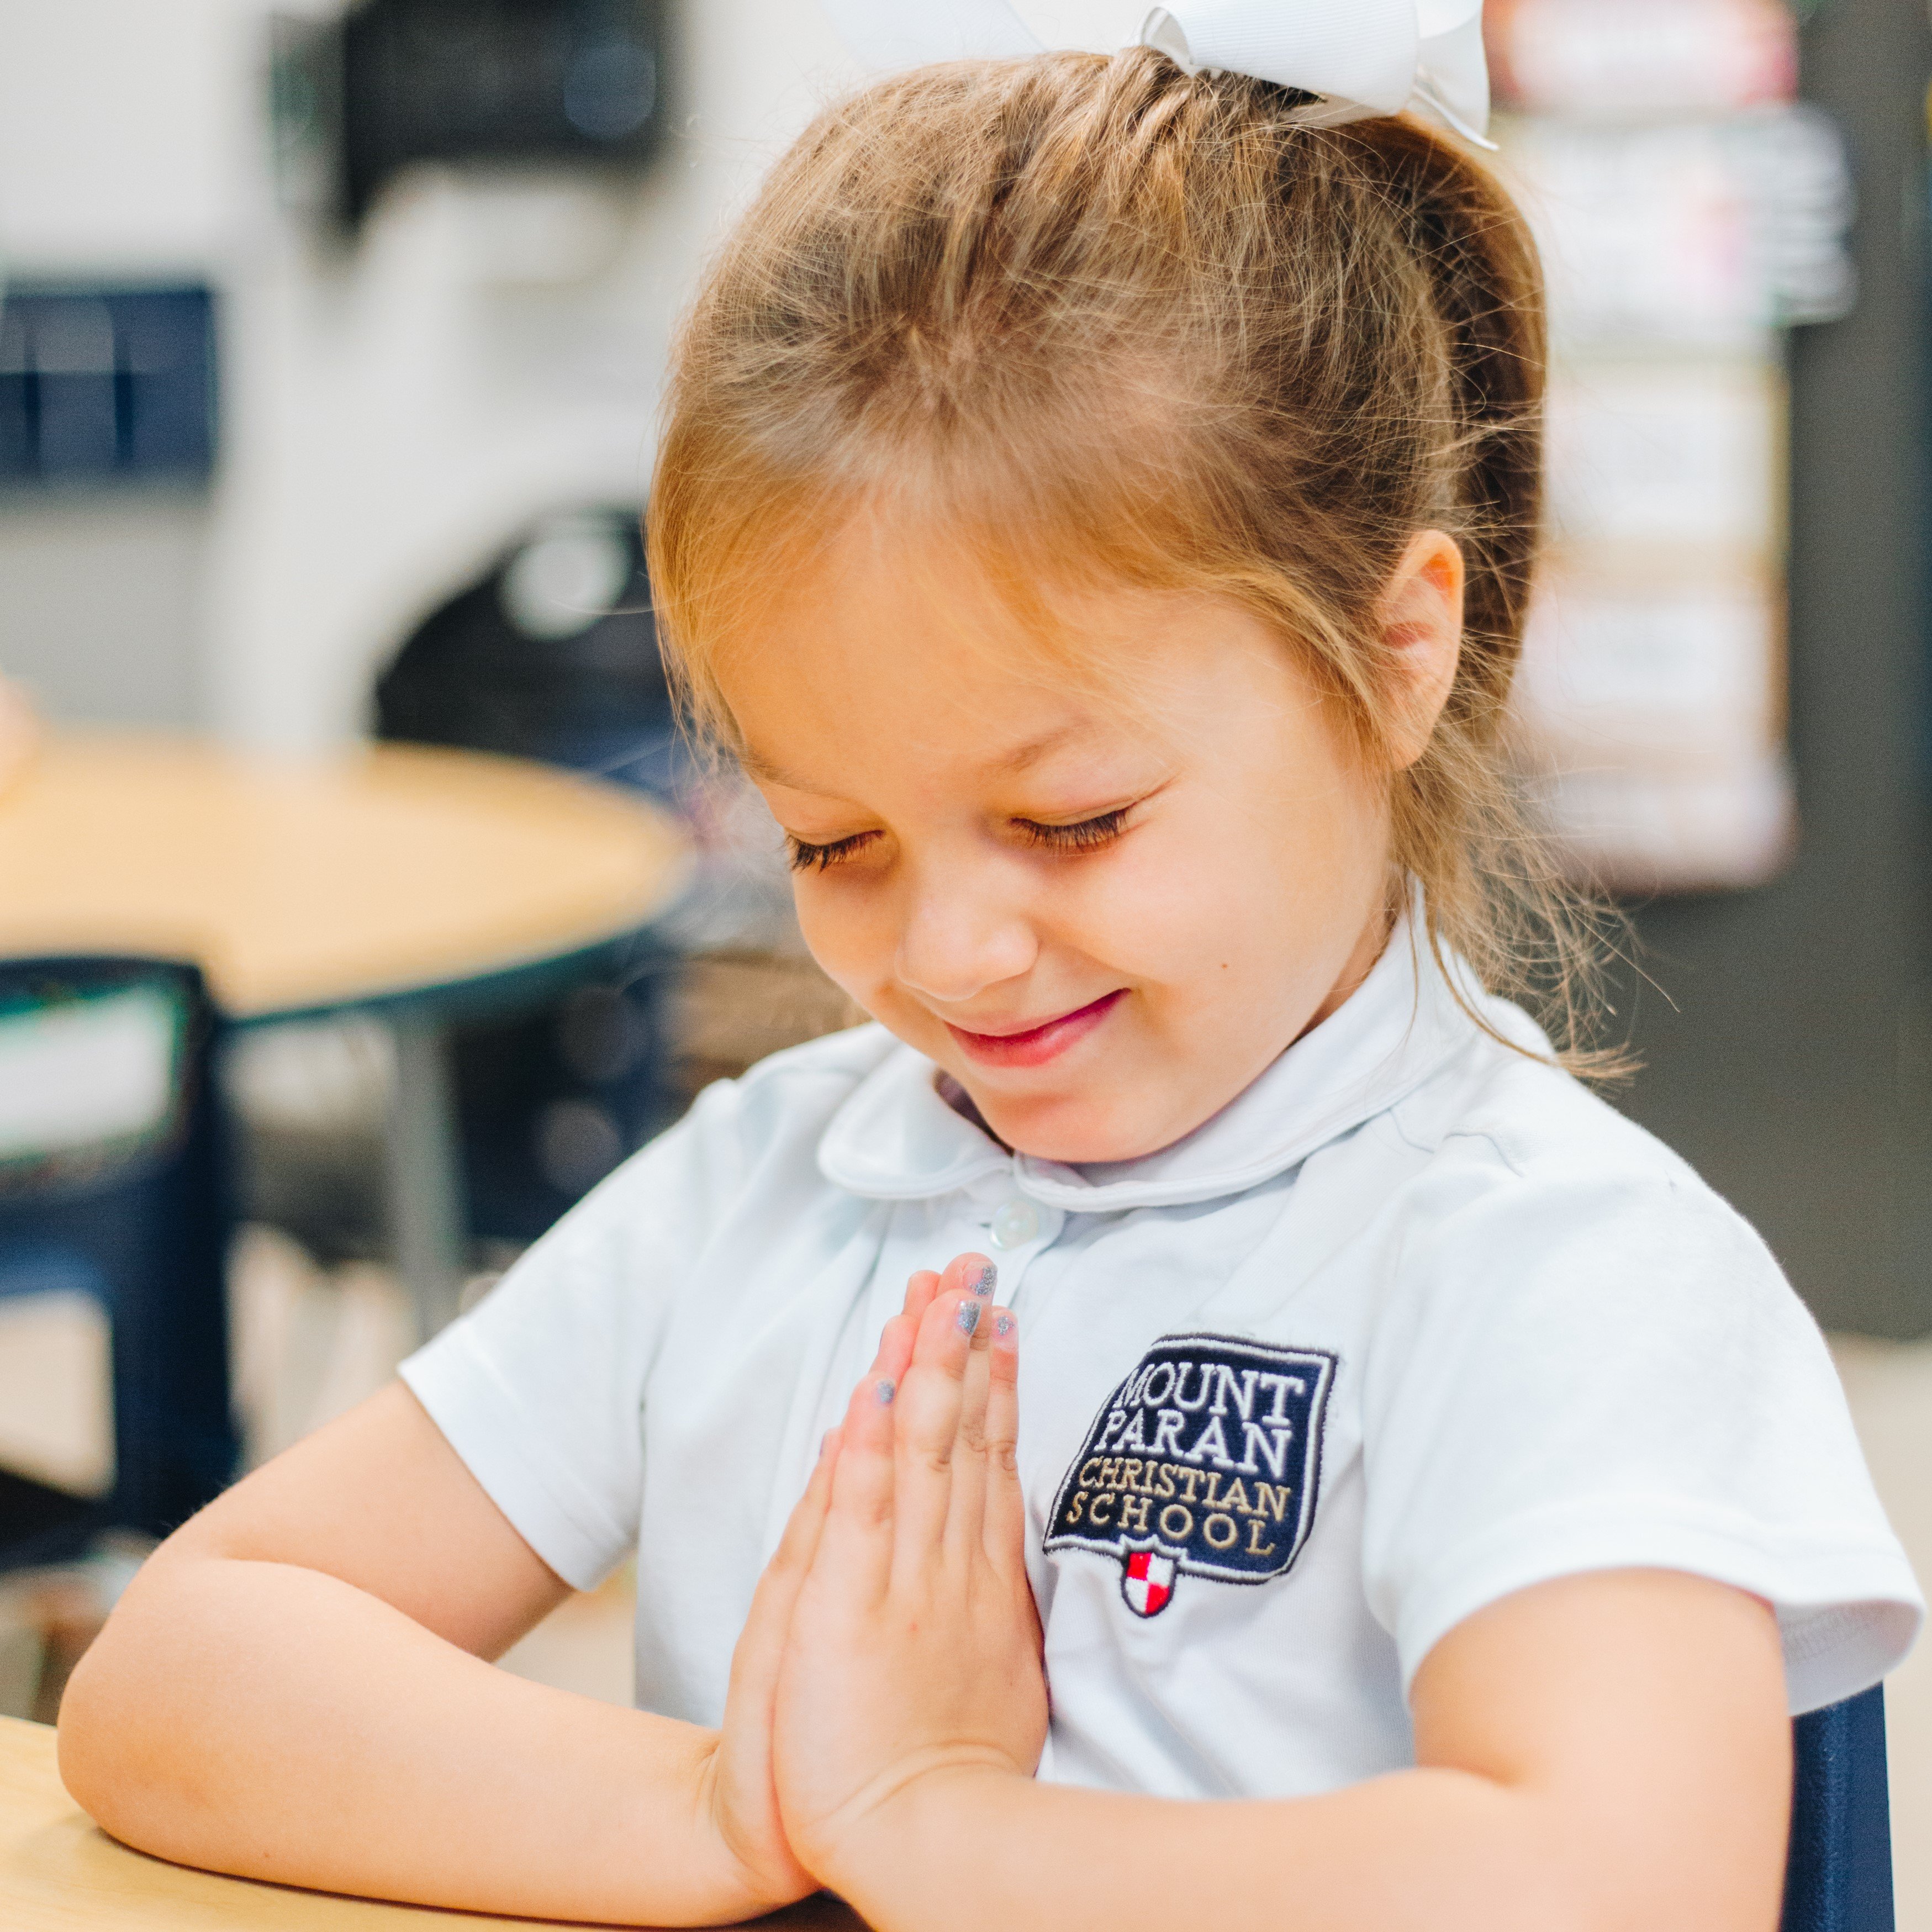 3 Reasons Why I Believe in Christian Schools